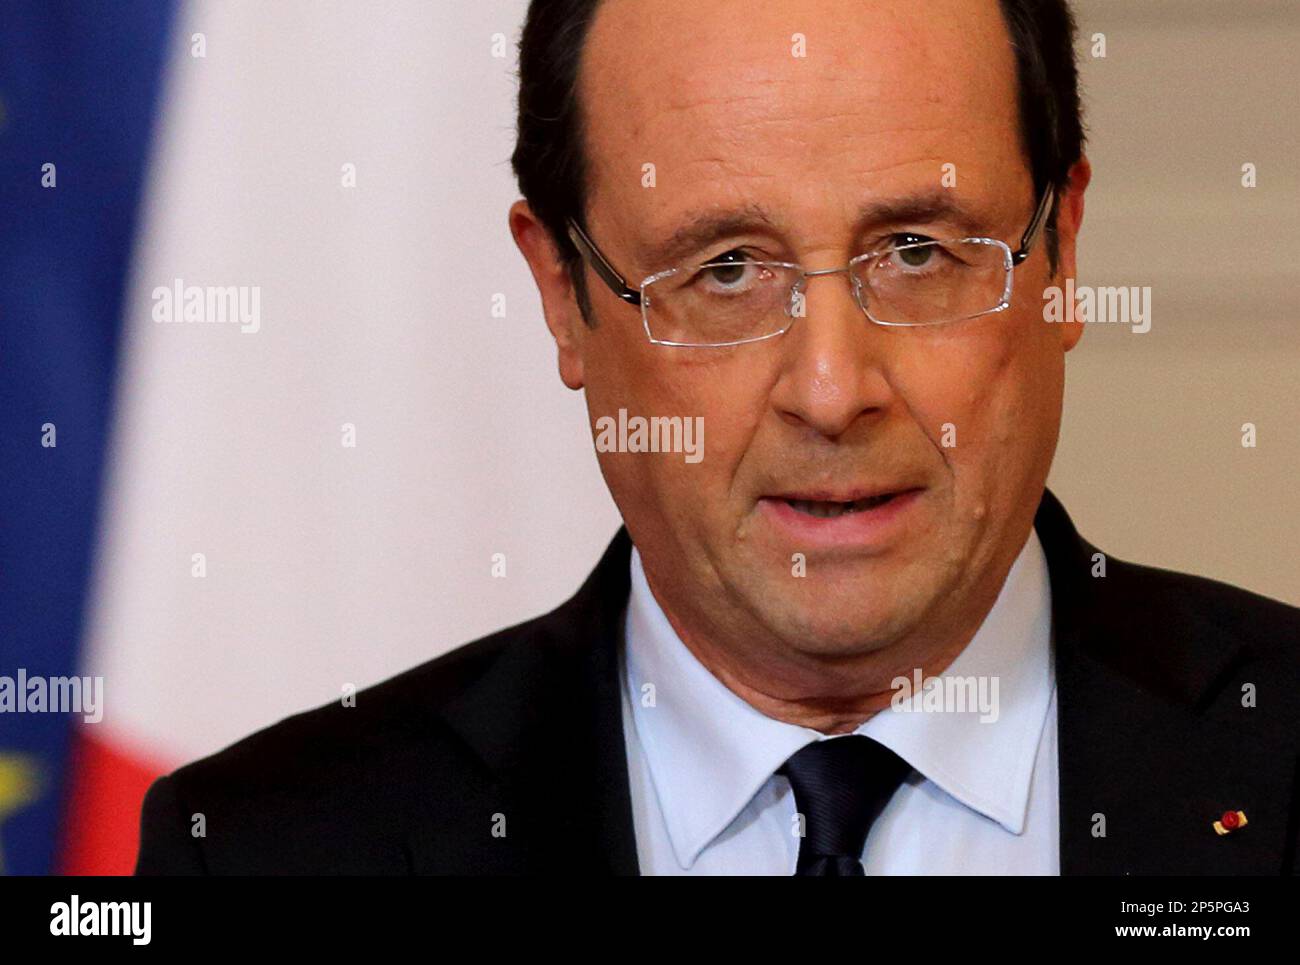 France's President Francois Hollande delivers a speech on the situation in Mali at the Elysee Palace in Paris, Friday, Jan. 11, 2013. French forces began backing Malian soldiers Friday in their fight against radical Islamists, drawing the former colonial power into a military operation to oust the al-Qaida-linked militants nine months after they seized control of northern Mali. French President Francois Hollande said that the operation would last "as long as necessary" and said it was aimed notably at protecting the 6,000 French citizens in Mali. Kidnappers currently hold seven French hostages Stock Photo